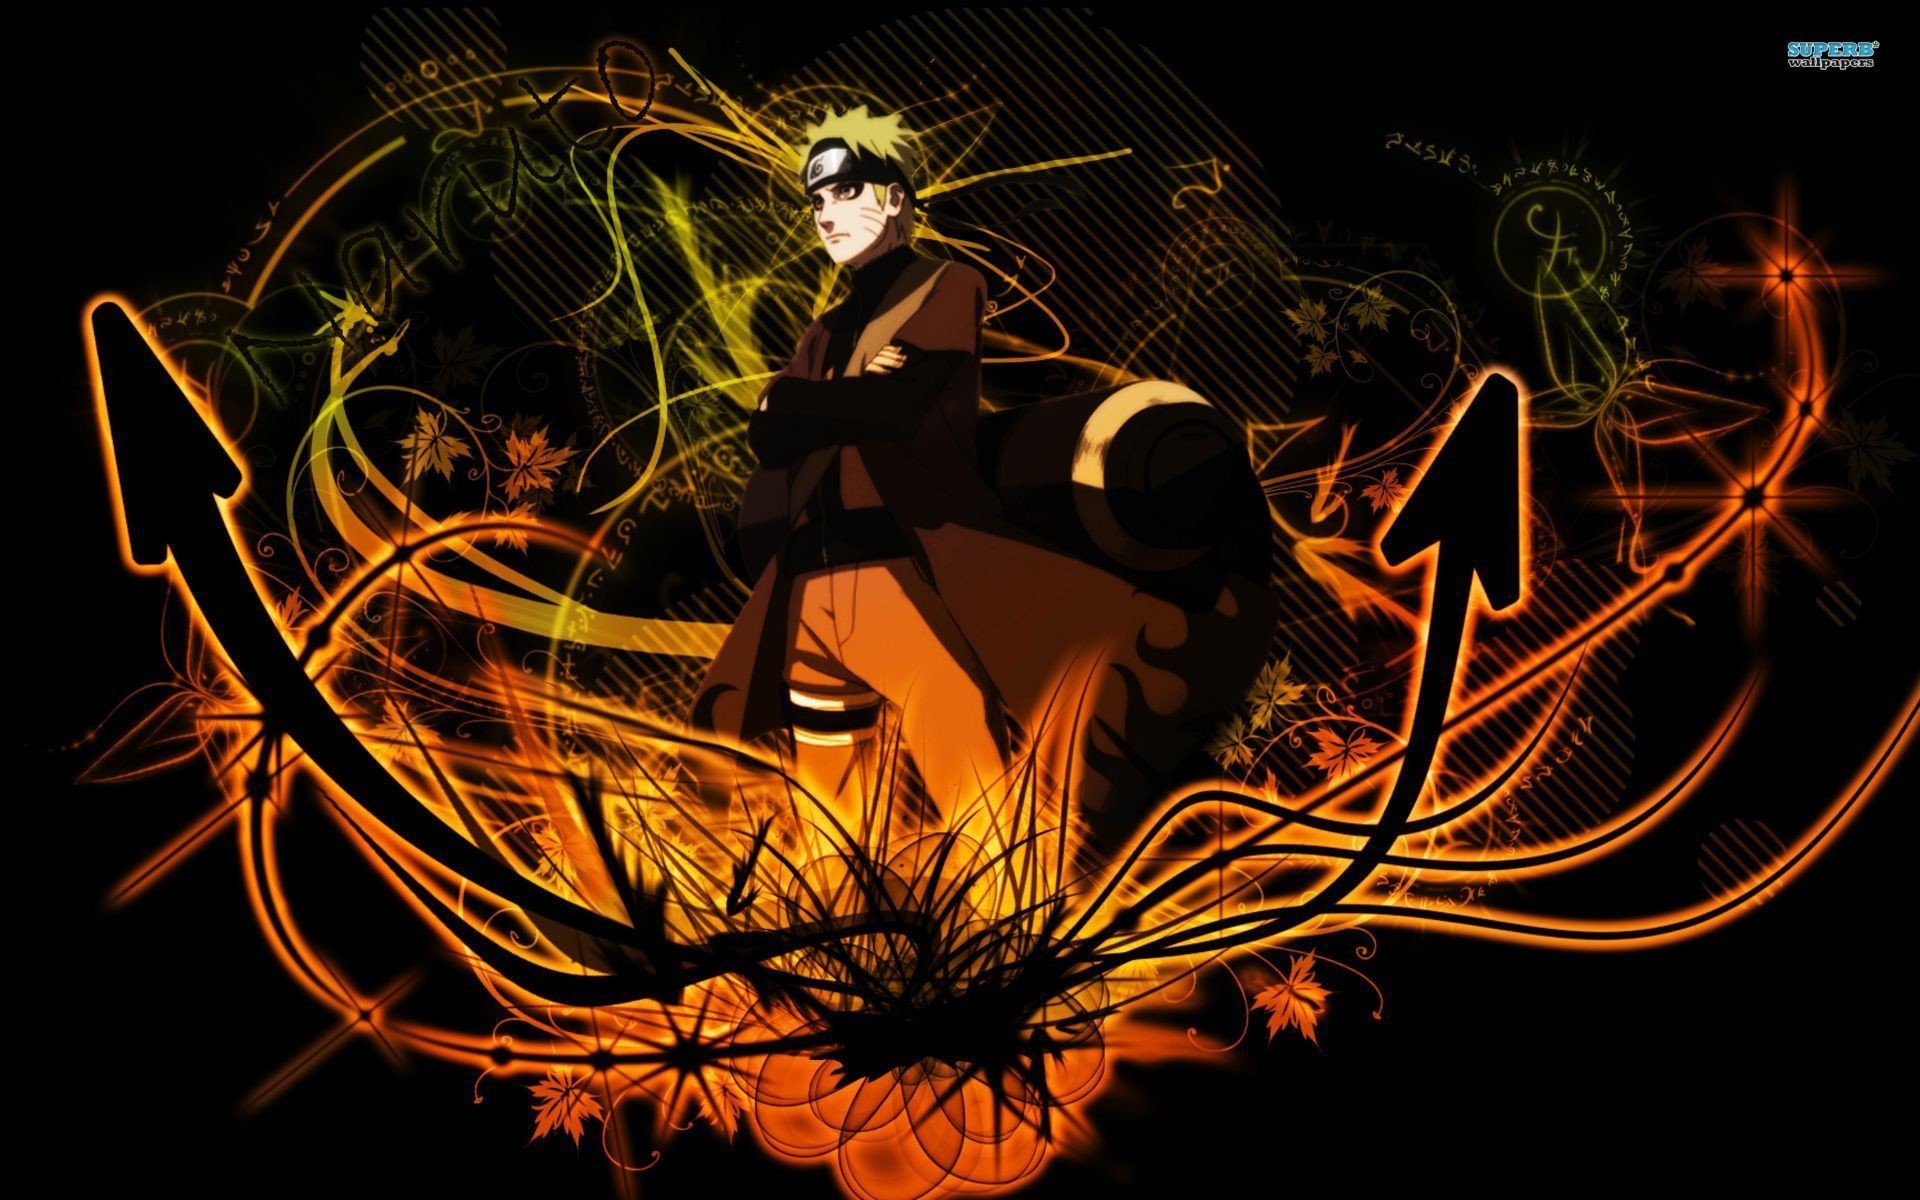 1920x1200  Naruto HD Wallpapers and Backgrounds 1920Ã—1080 Imagenes De Naruto  Shippuden Wallpapers (49 Wallpapers